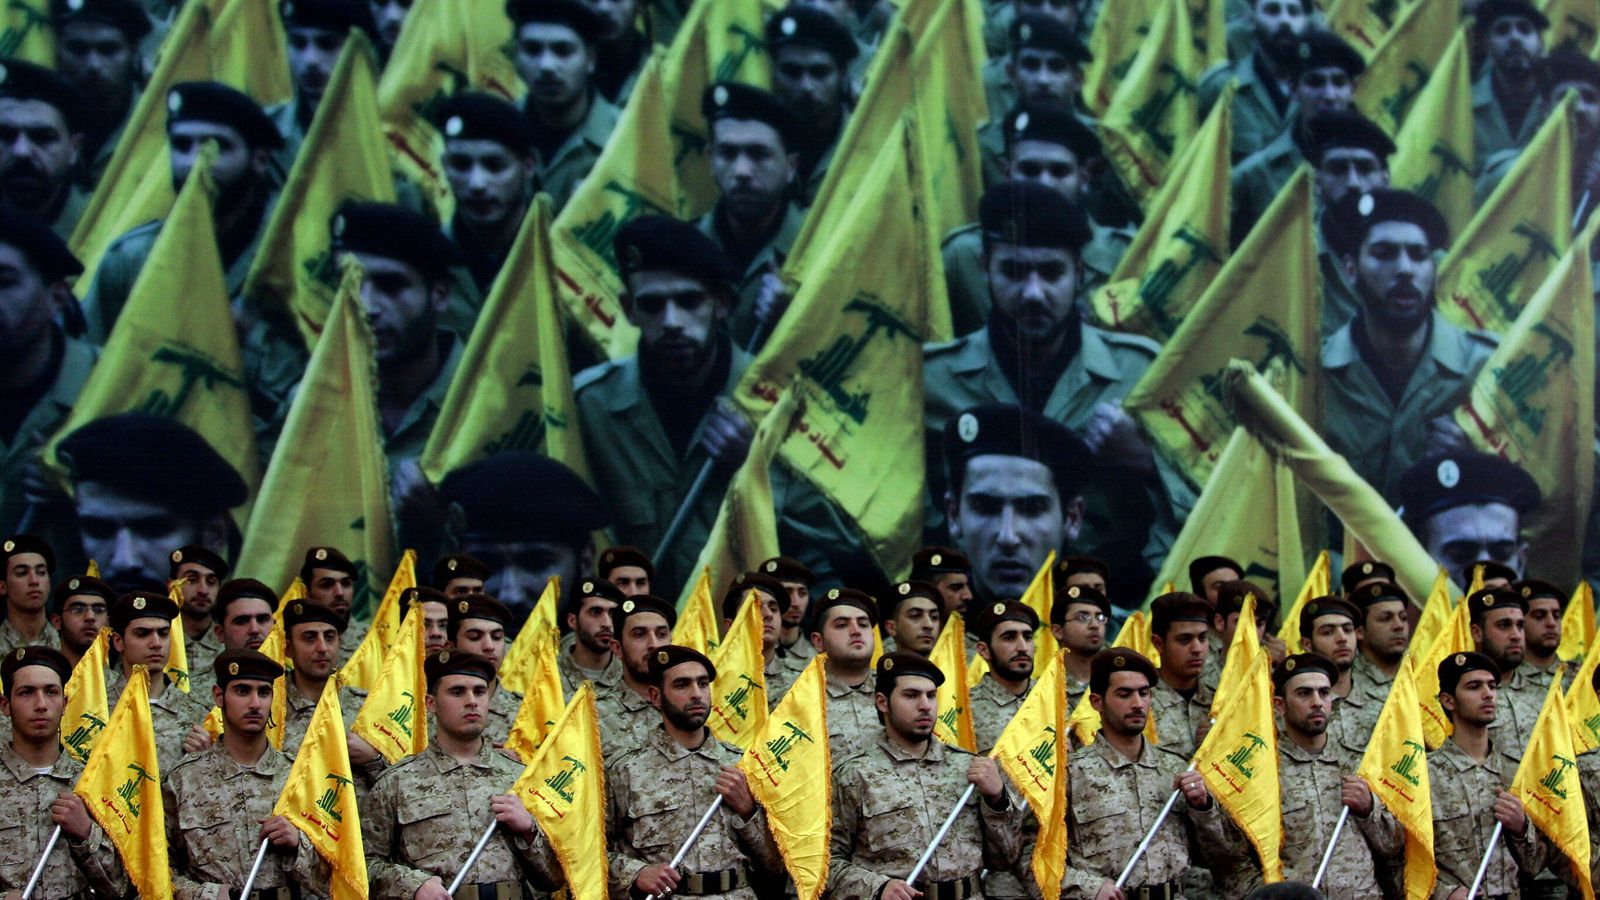 Armed to the teeth and well-trained: Why Israel is braced for Hezbollah attack from Lebanon